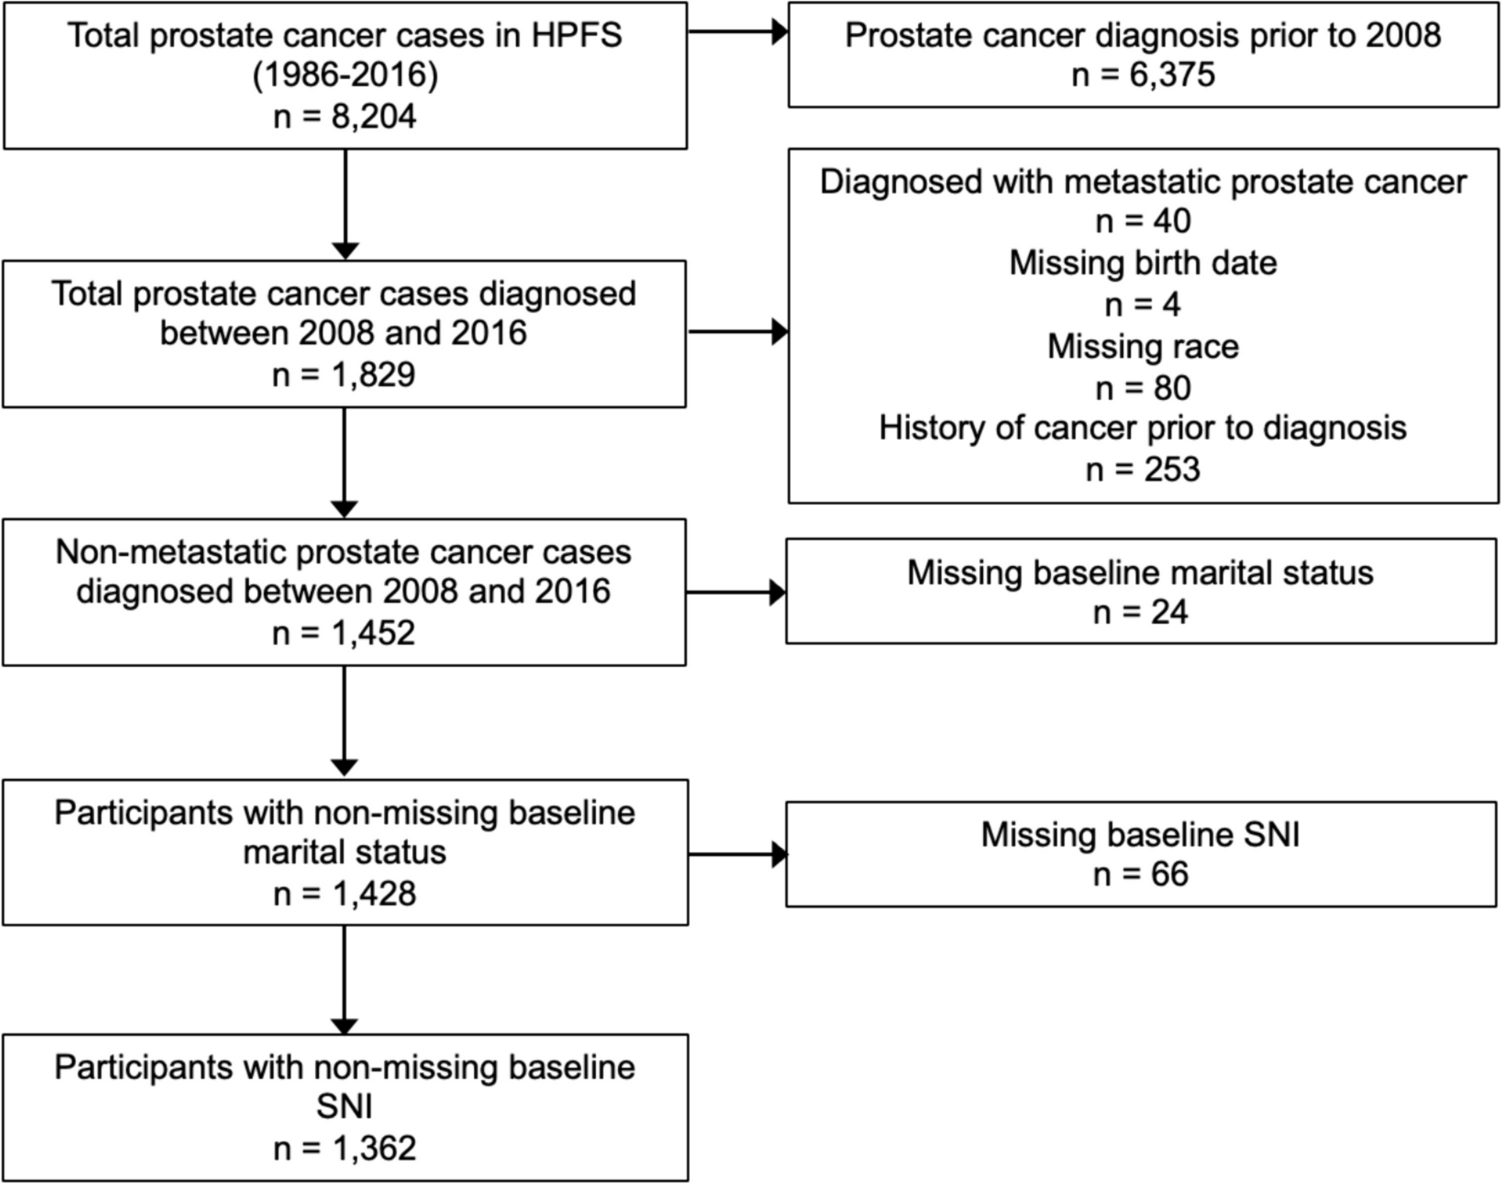 Social integration and long-term physical and psychosocial quality of life among prostate cancer survivors in the Health Professionals Follow-up Study